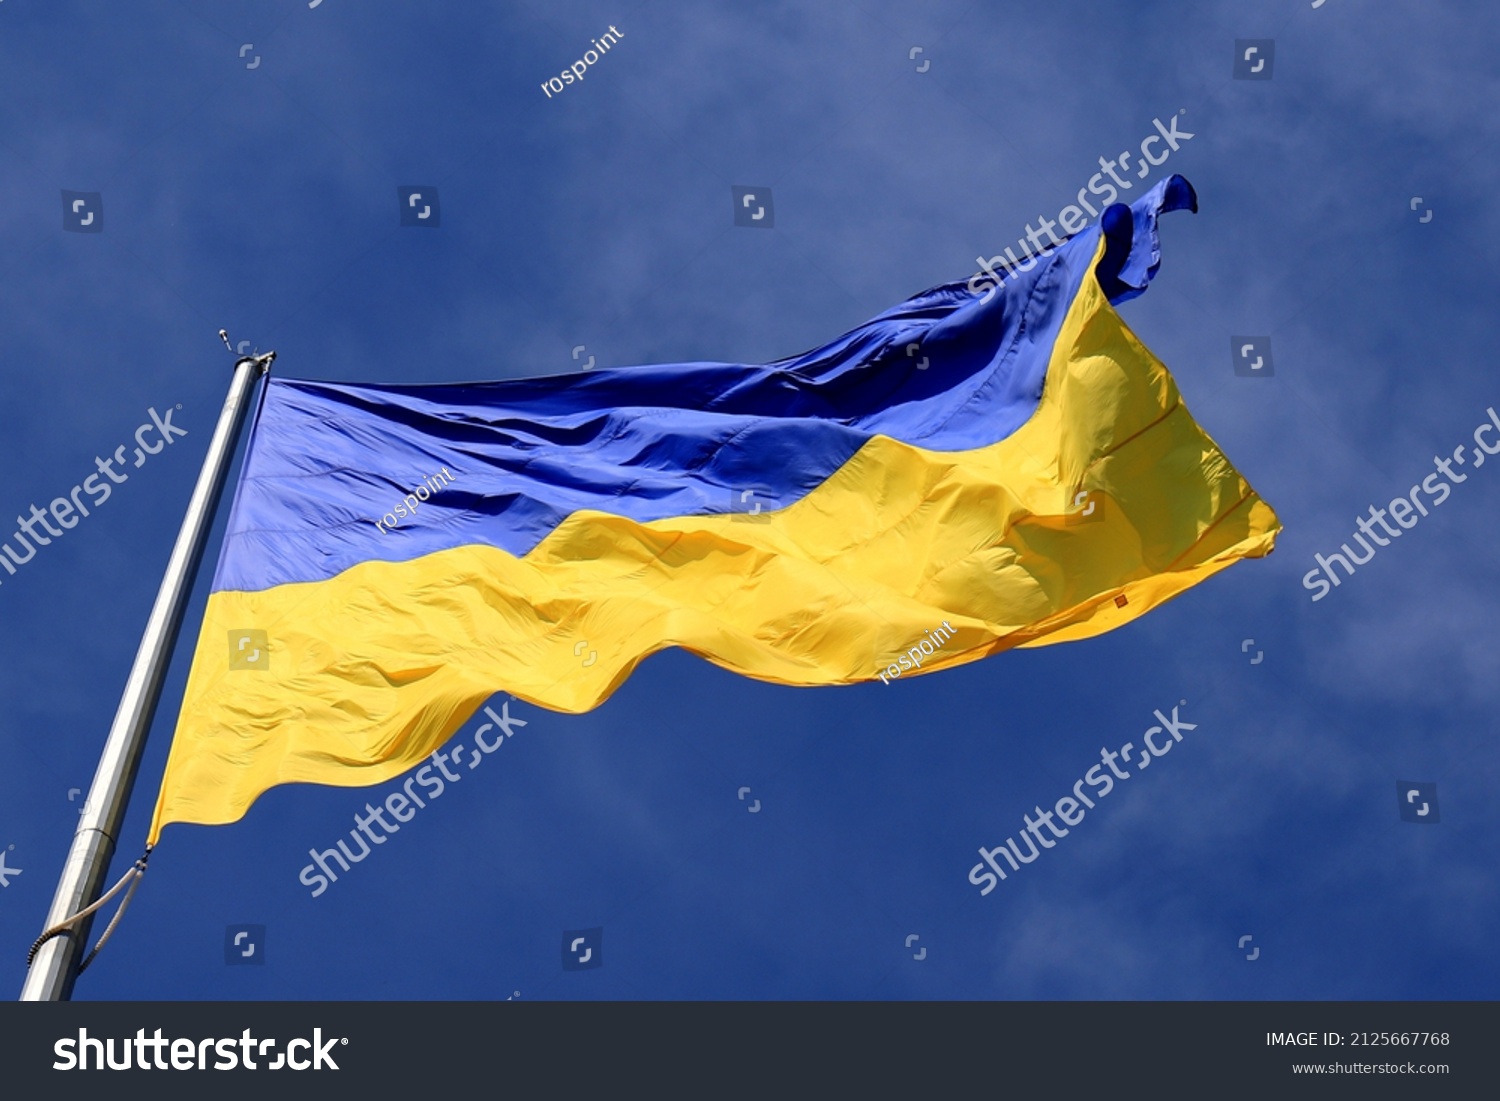 Ukraine flag large national symbol fluttering in blue sky. Large yellow blue Ukrainian state flag, Dnipro city, Independence Constitution Day, National holiday.  #2125667768